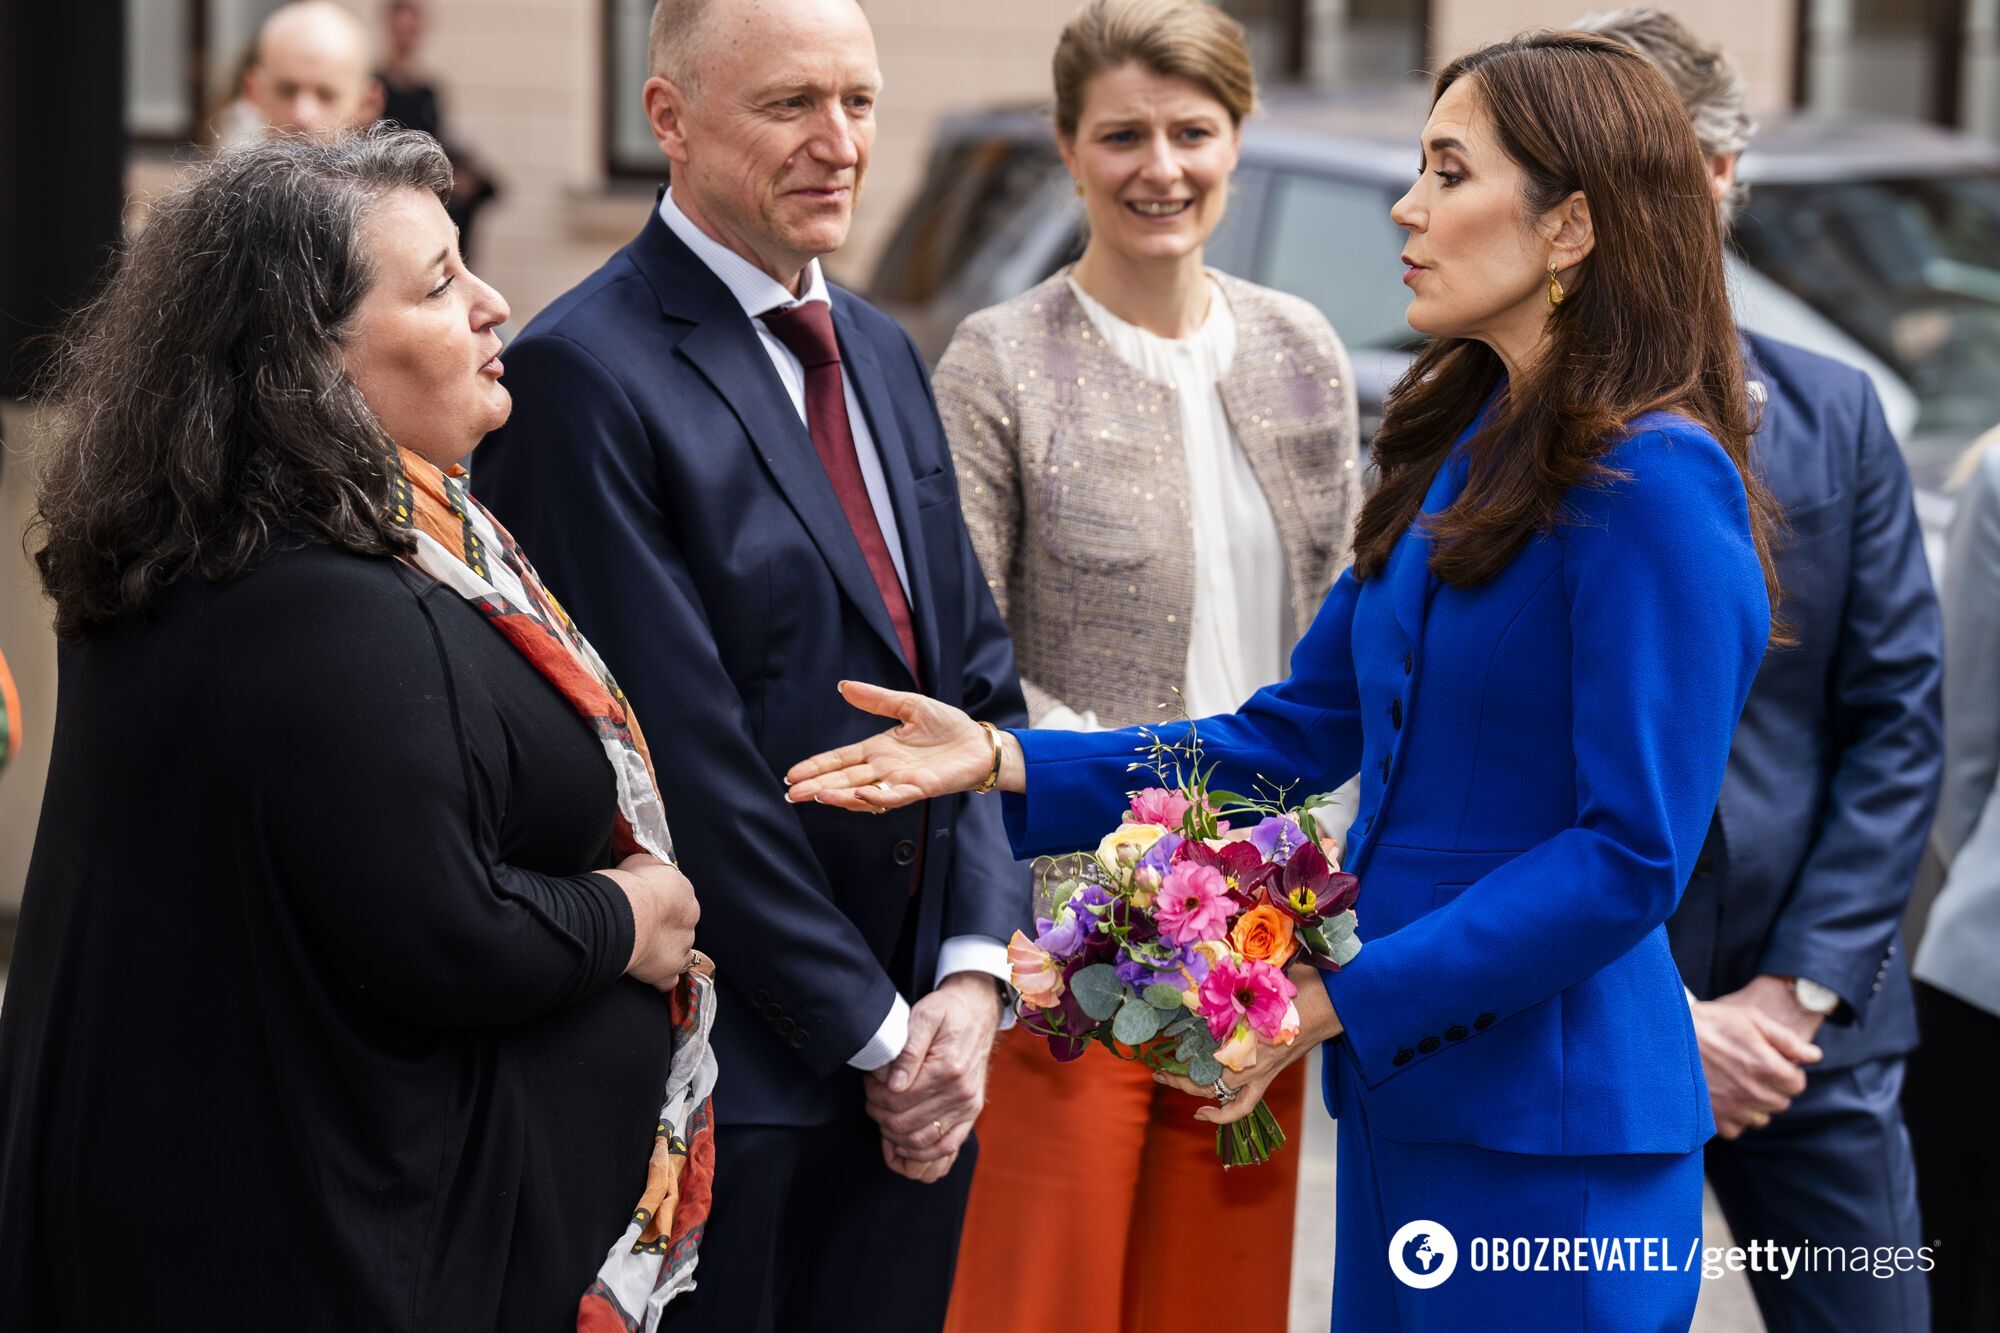 The Queen of Denmark in a cobalt-colored suit broke her own fashion rule. Photo